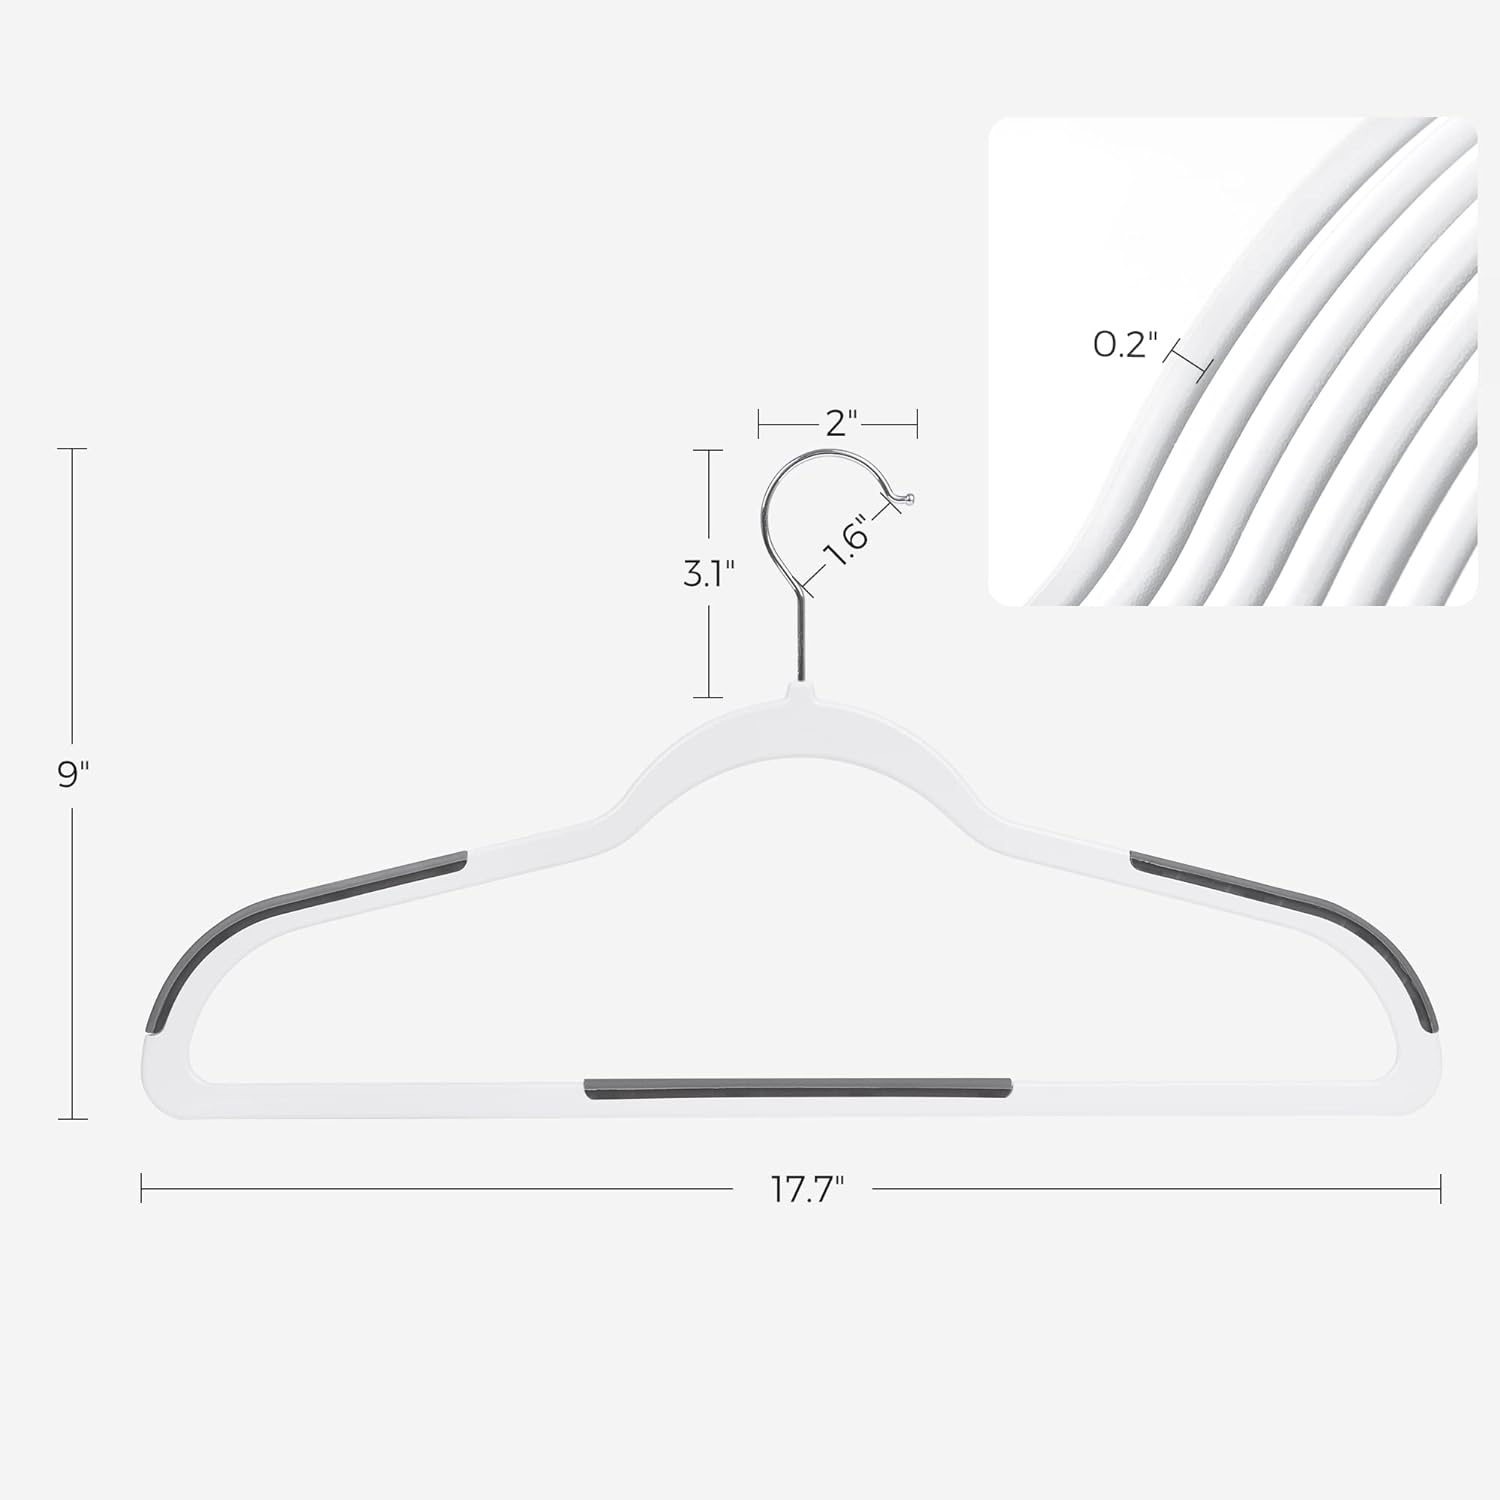 https://bigbigmart.com/wp-content/uploads/2023/12/SONGMICS-Clothes-Hangers-Pack-of-50-Plastic-Coat-Hangers-Non-Slip-Space-Saving-0.2-Inches-Thick-17.7-Inches-Long-360%C2%B0-Swivel-Hook-White-and-Dark-Gray-UCRP050W504.jpg